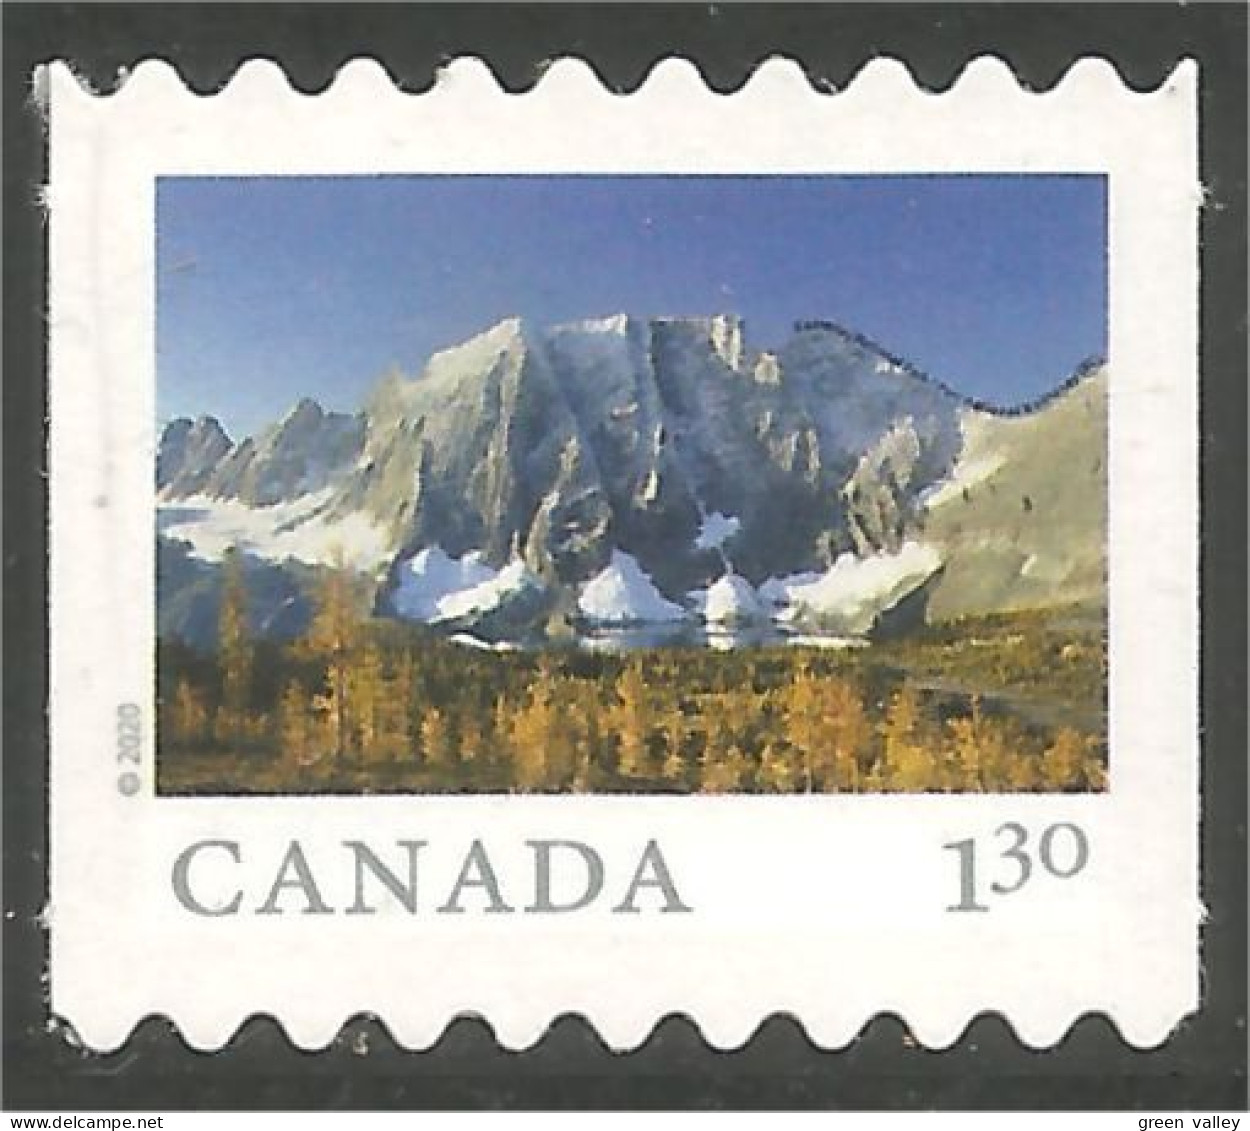 Canada Parc Kootenay National Park Coil Roulette MNH ** Neuf SC (C32-26b) - Unused Stamps